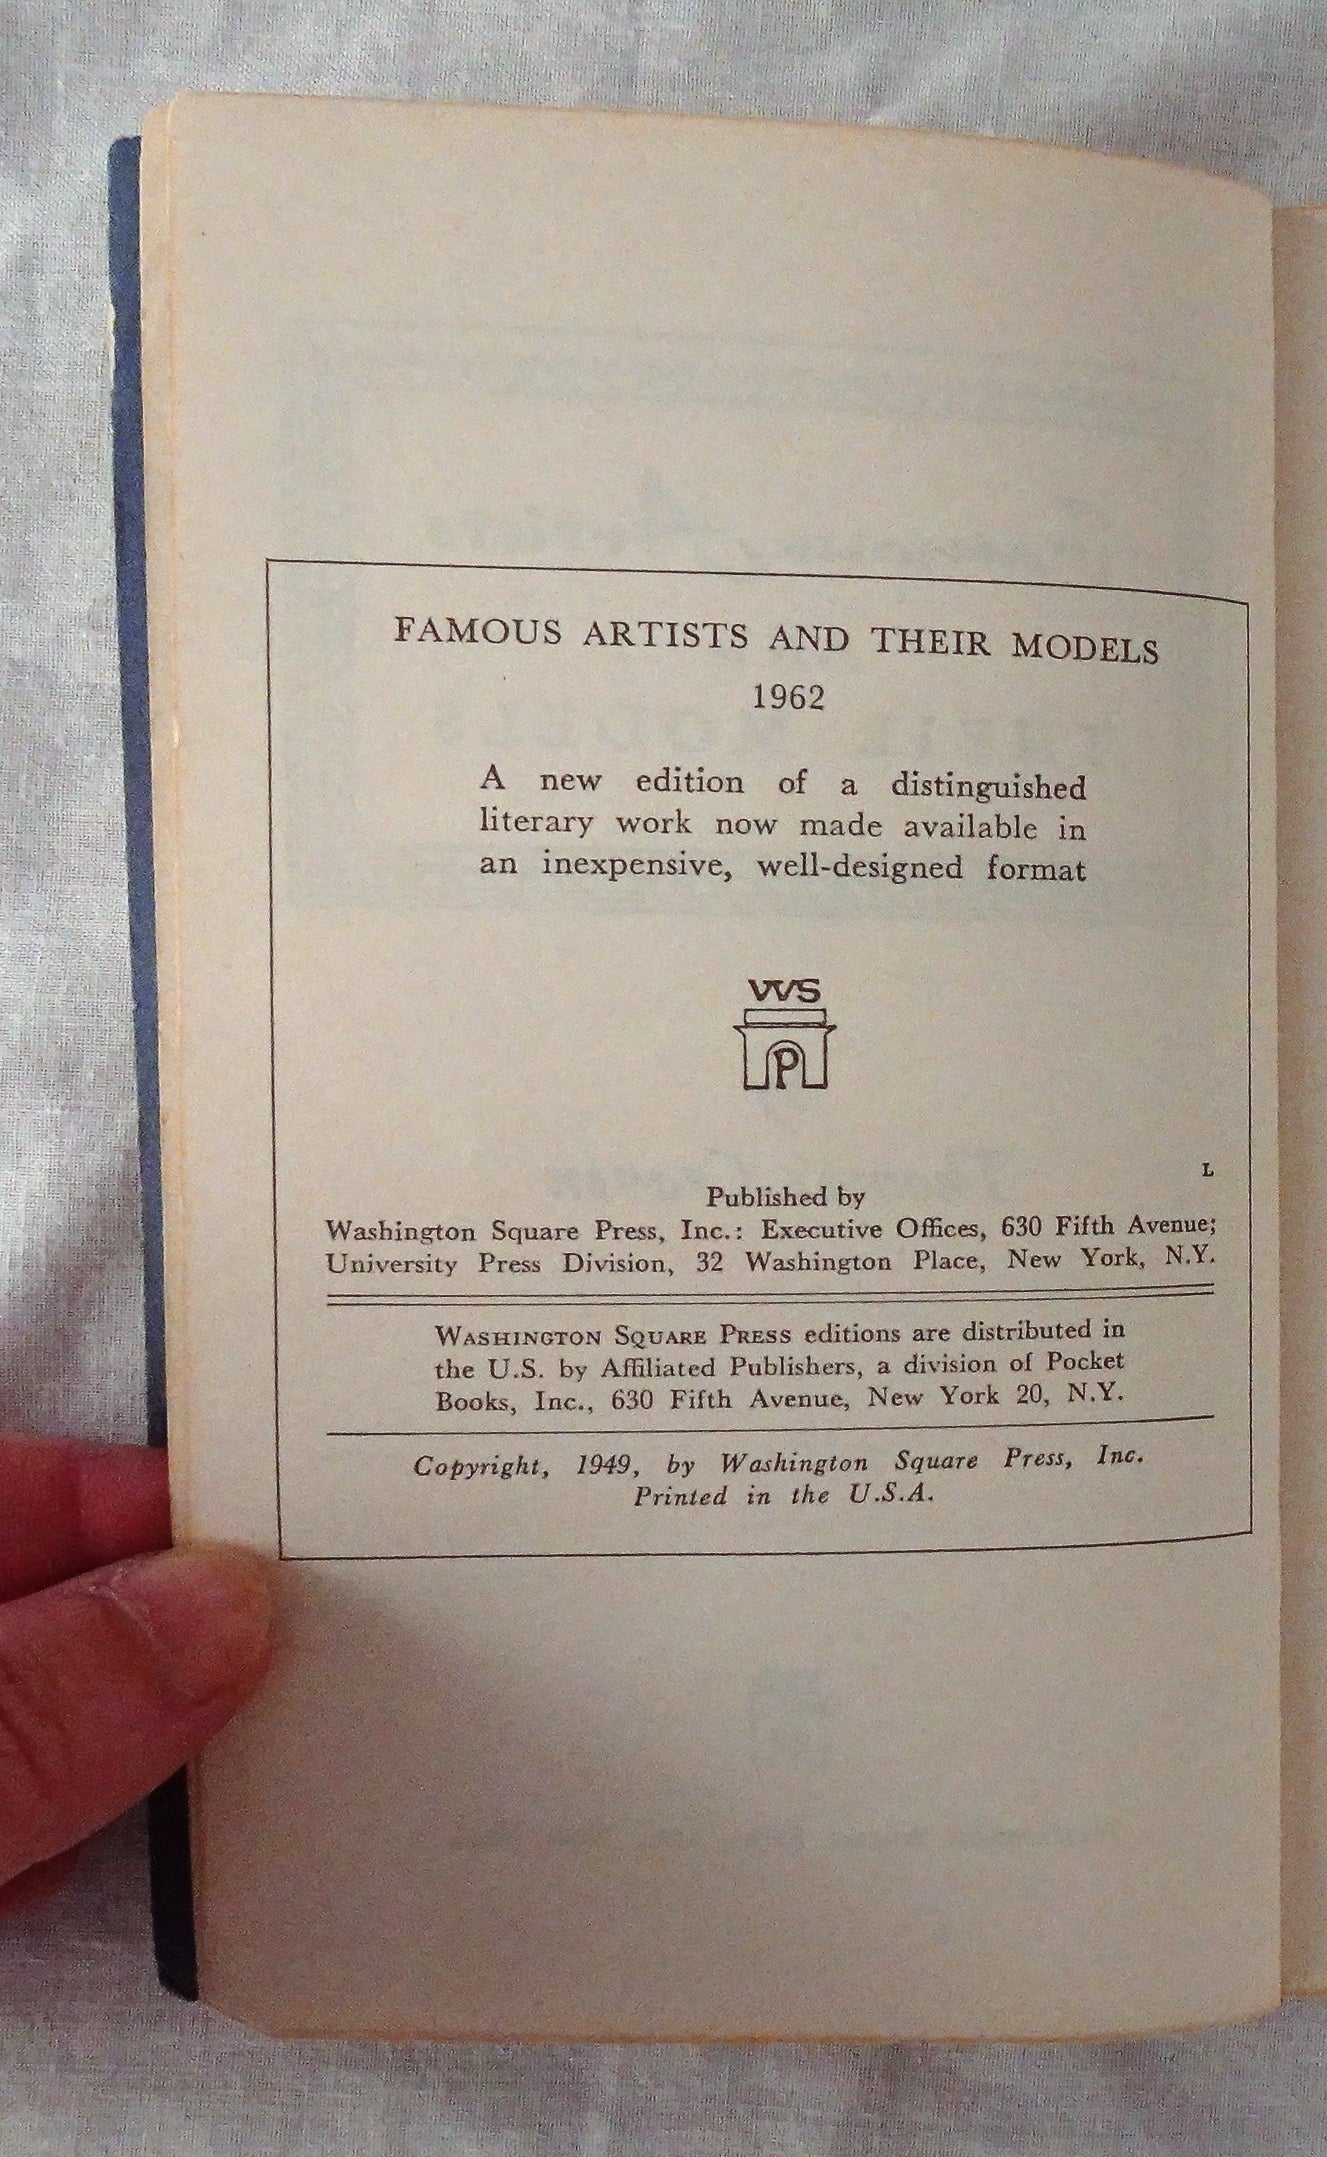 Famous Artists and Their Models by Thomas Craven